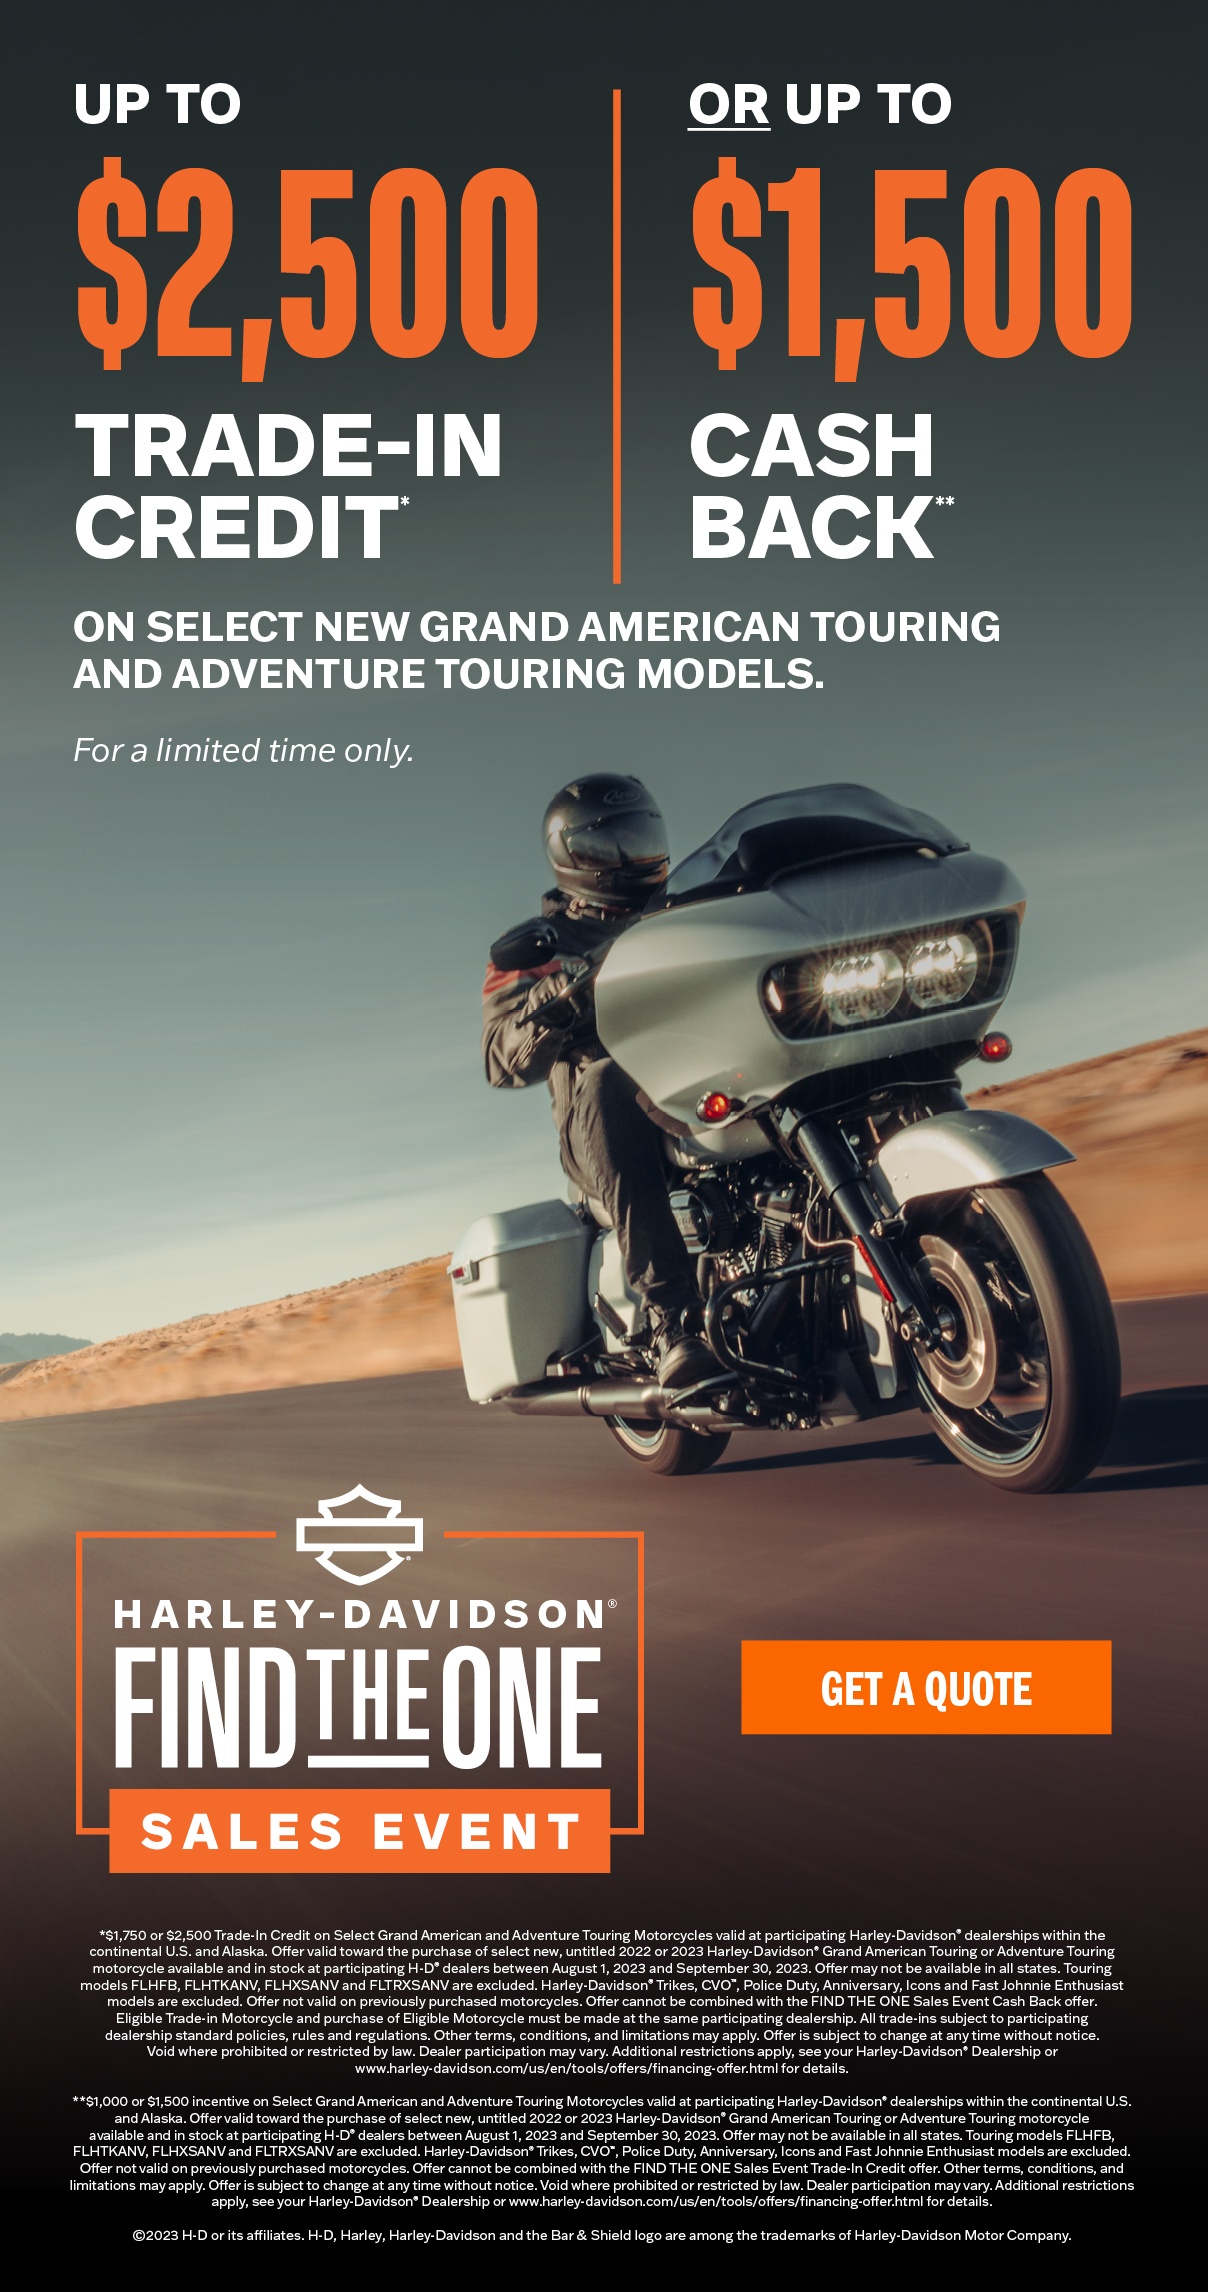 Find the One Sales Event at Chippewa Falls Harley-Davidson